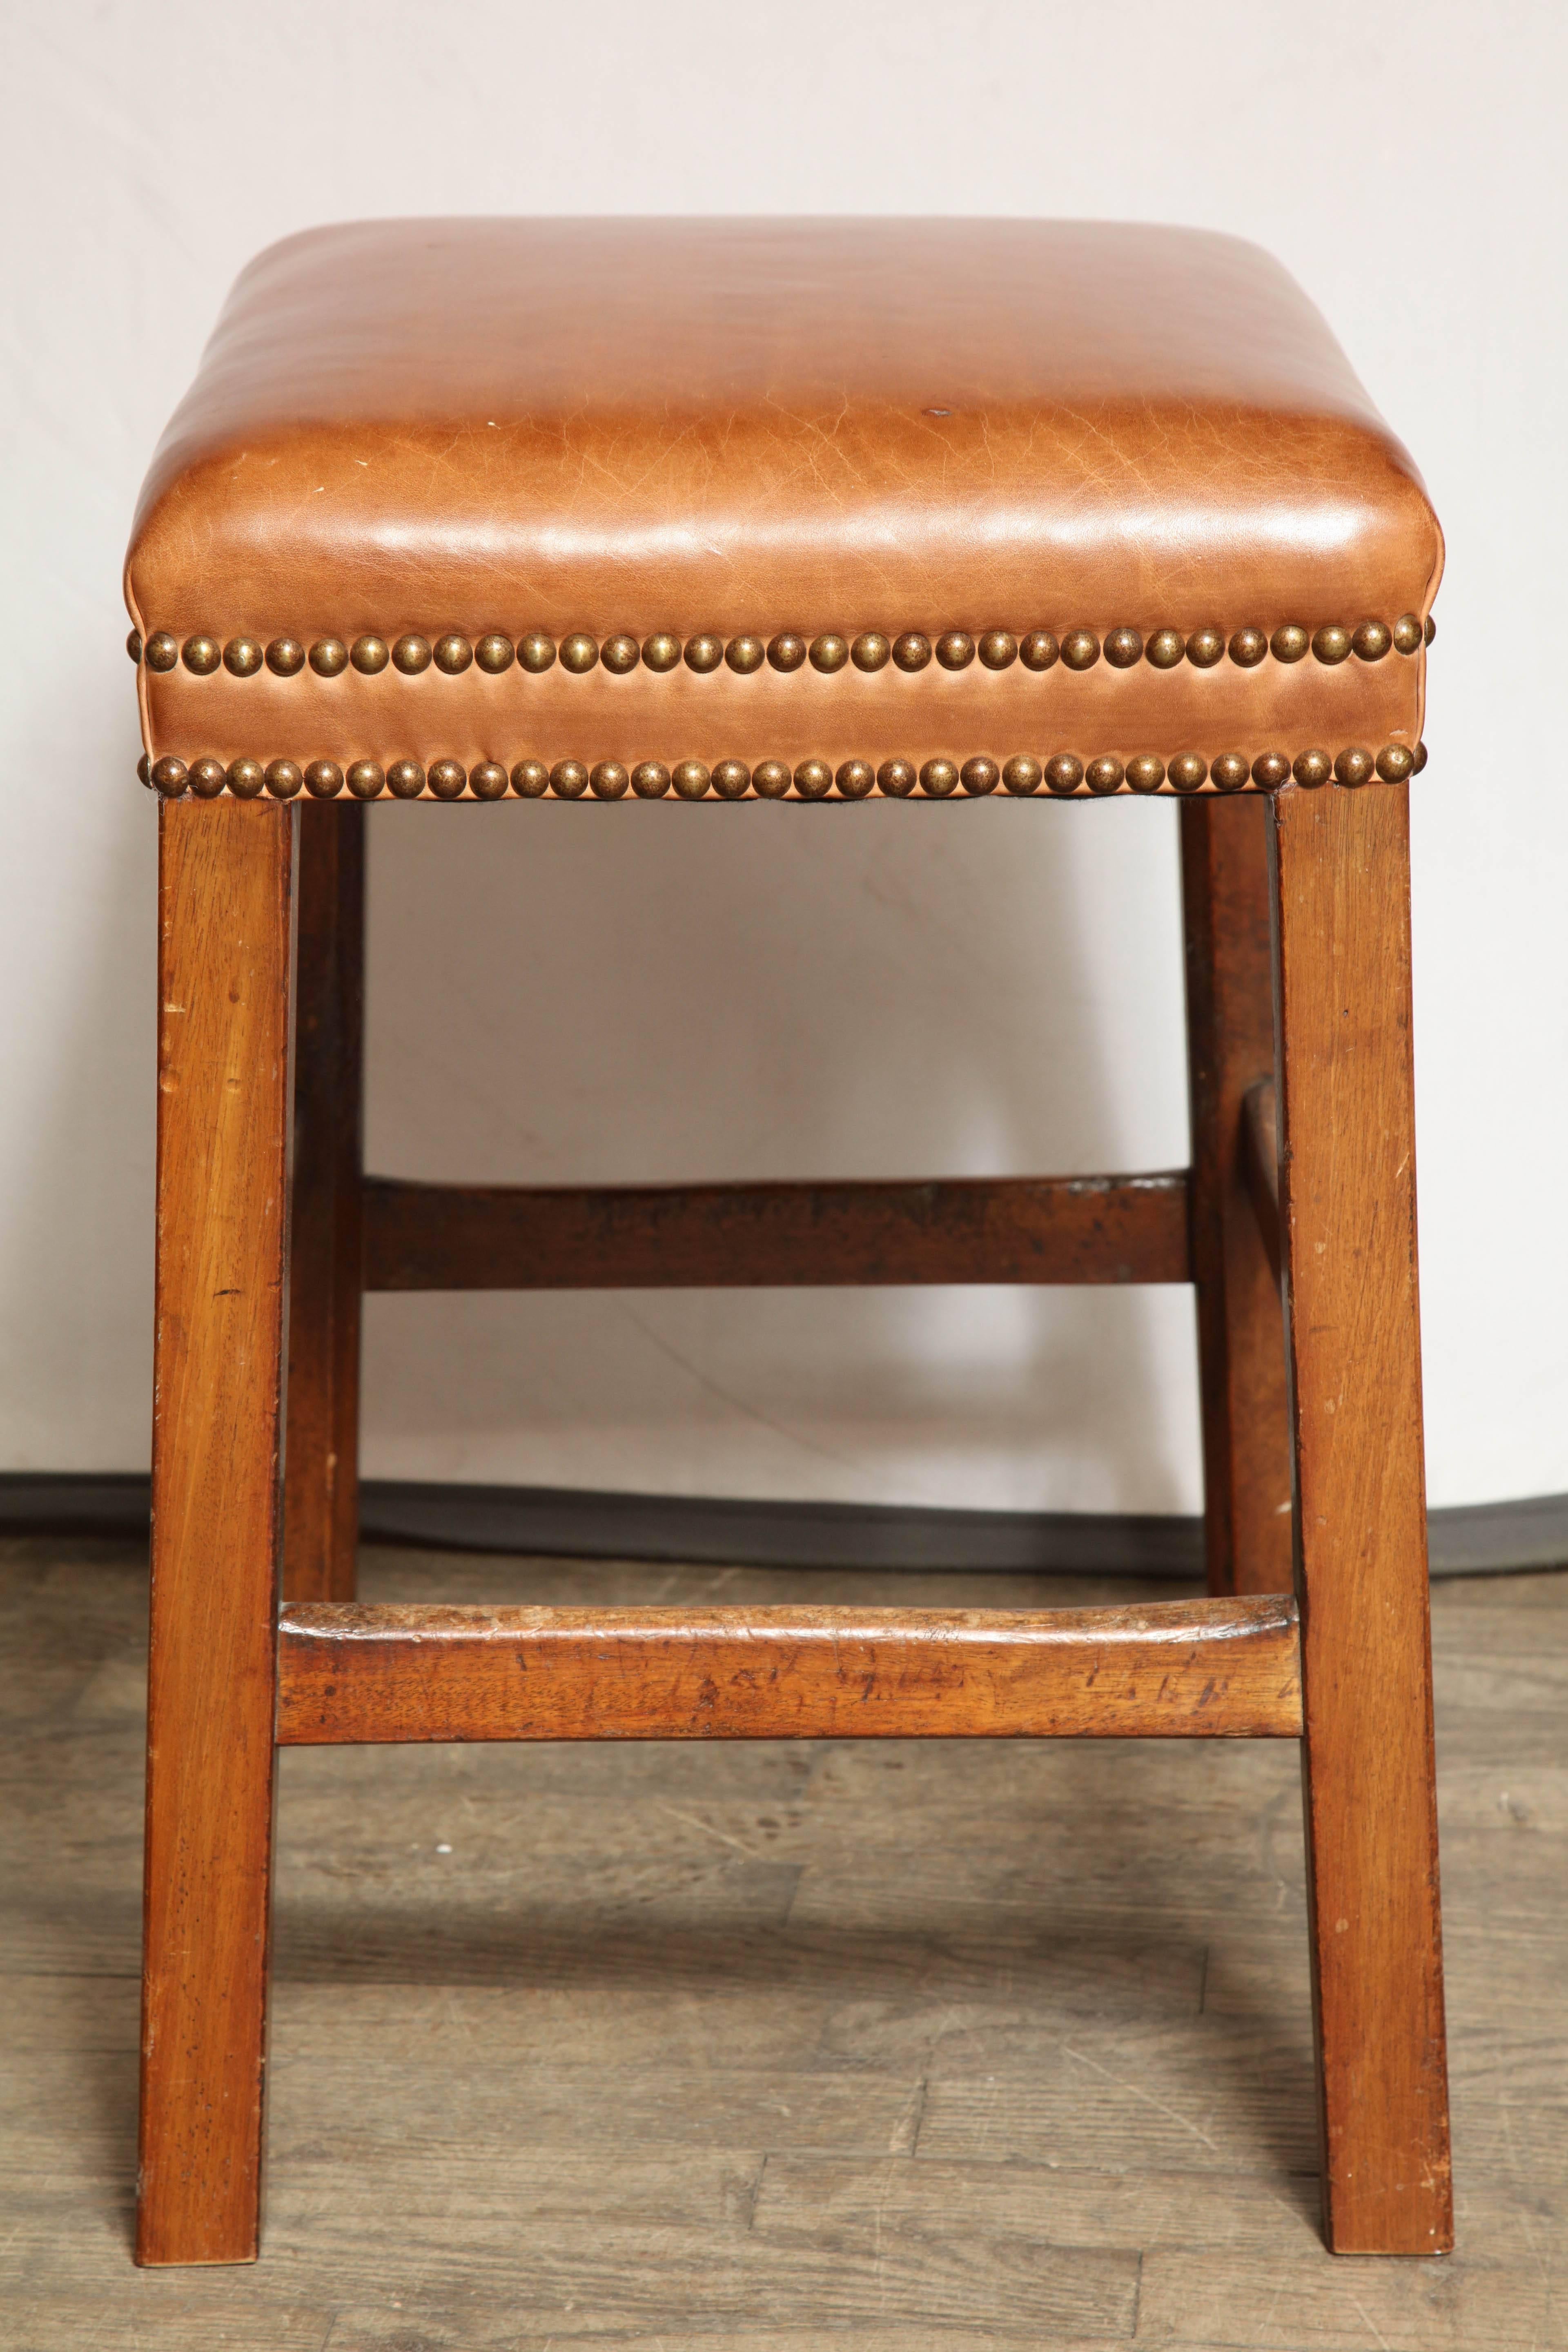 19th Century Pair of Antique Stools with Leather Seats